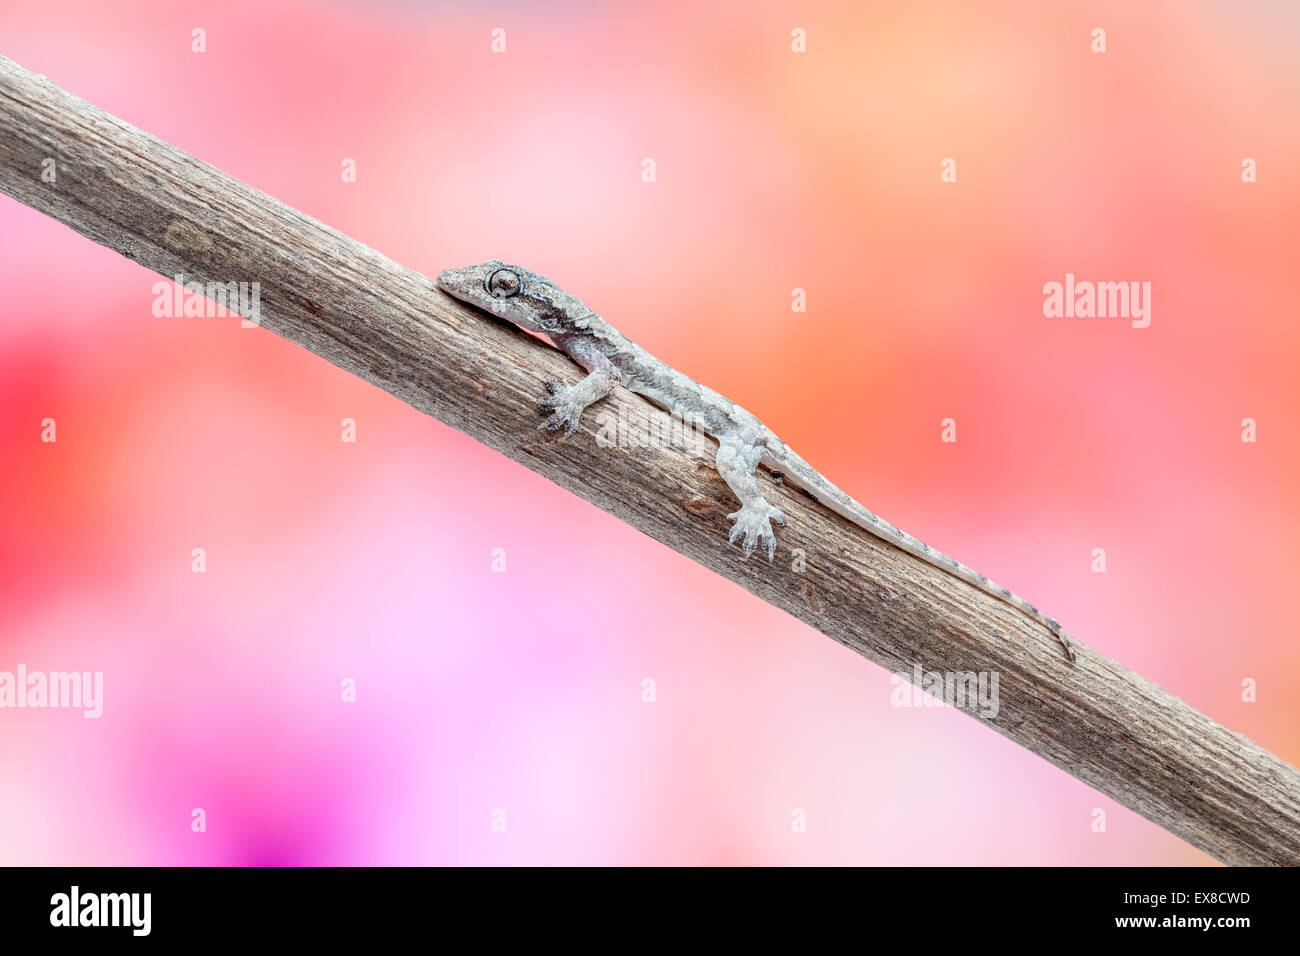 on a narrow branch of a tree is a gecko Stock Photo